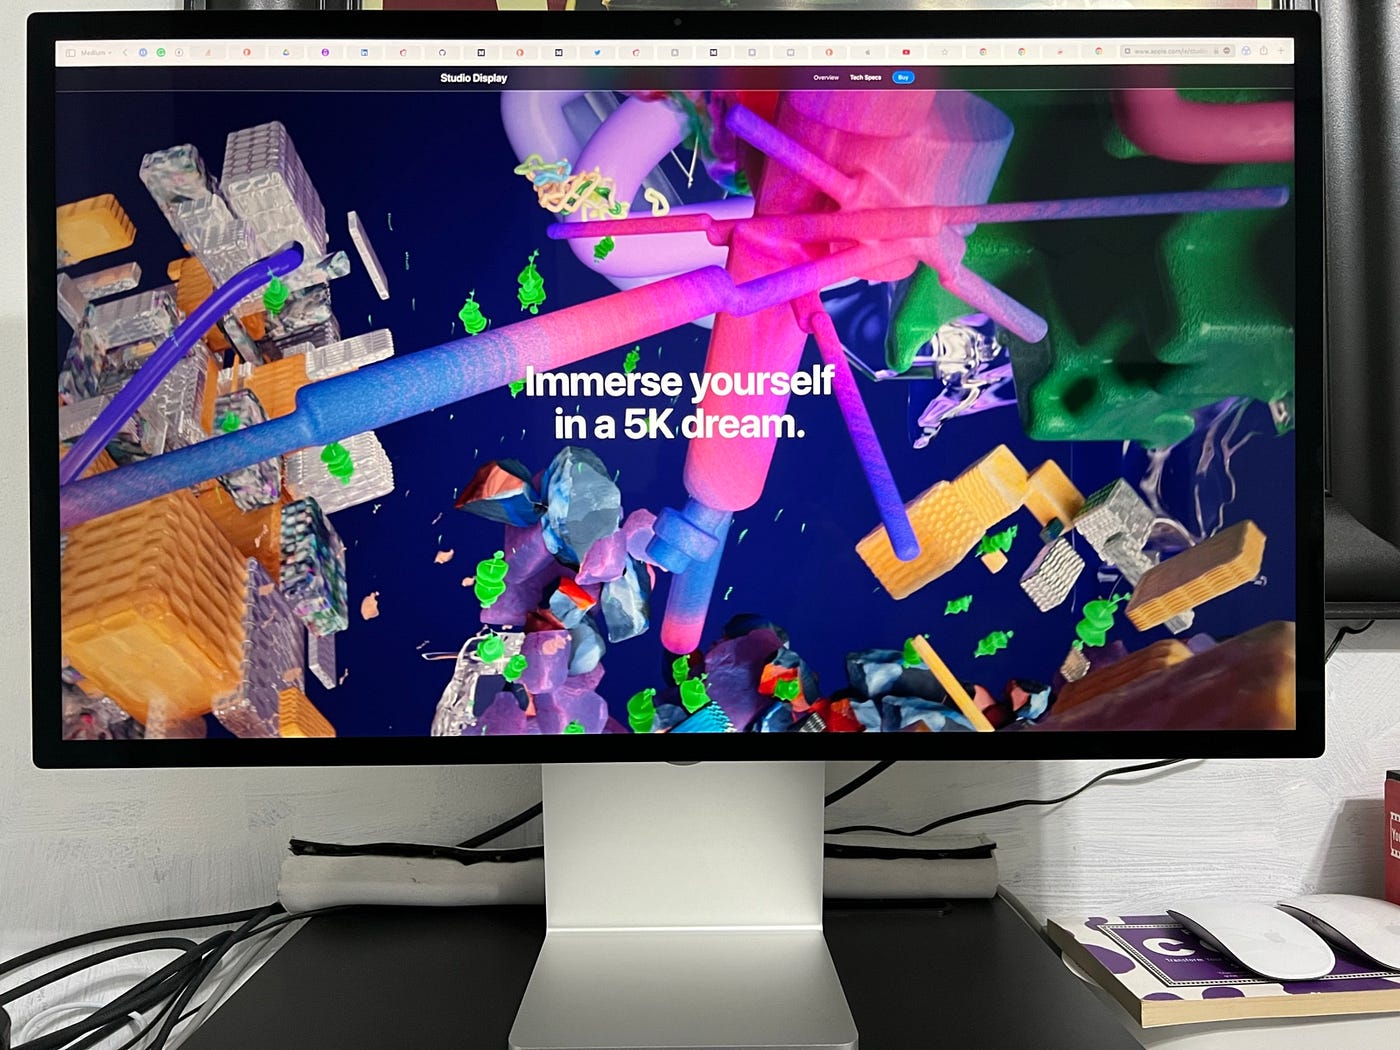 Apple's Studio Display is a 5K monitor with a built-in webcam